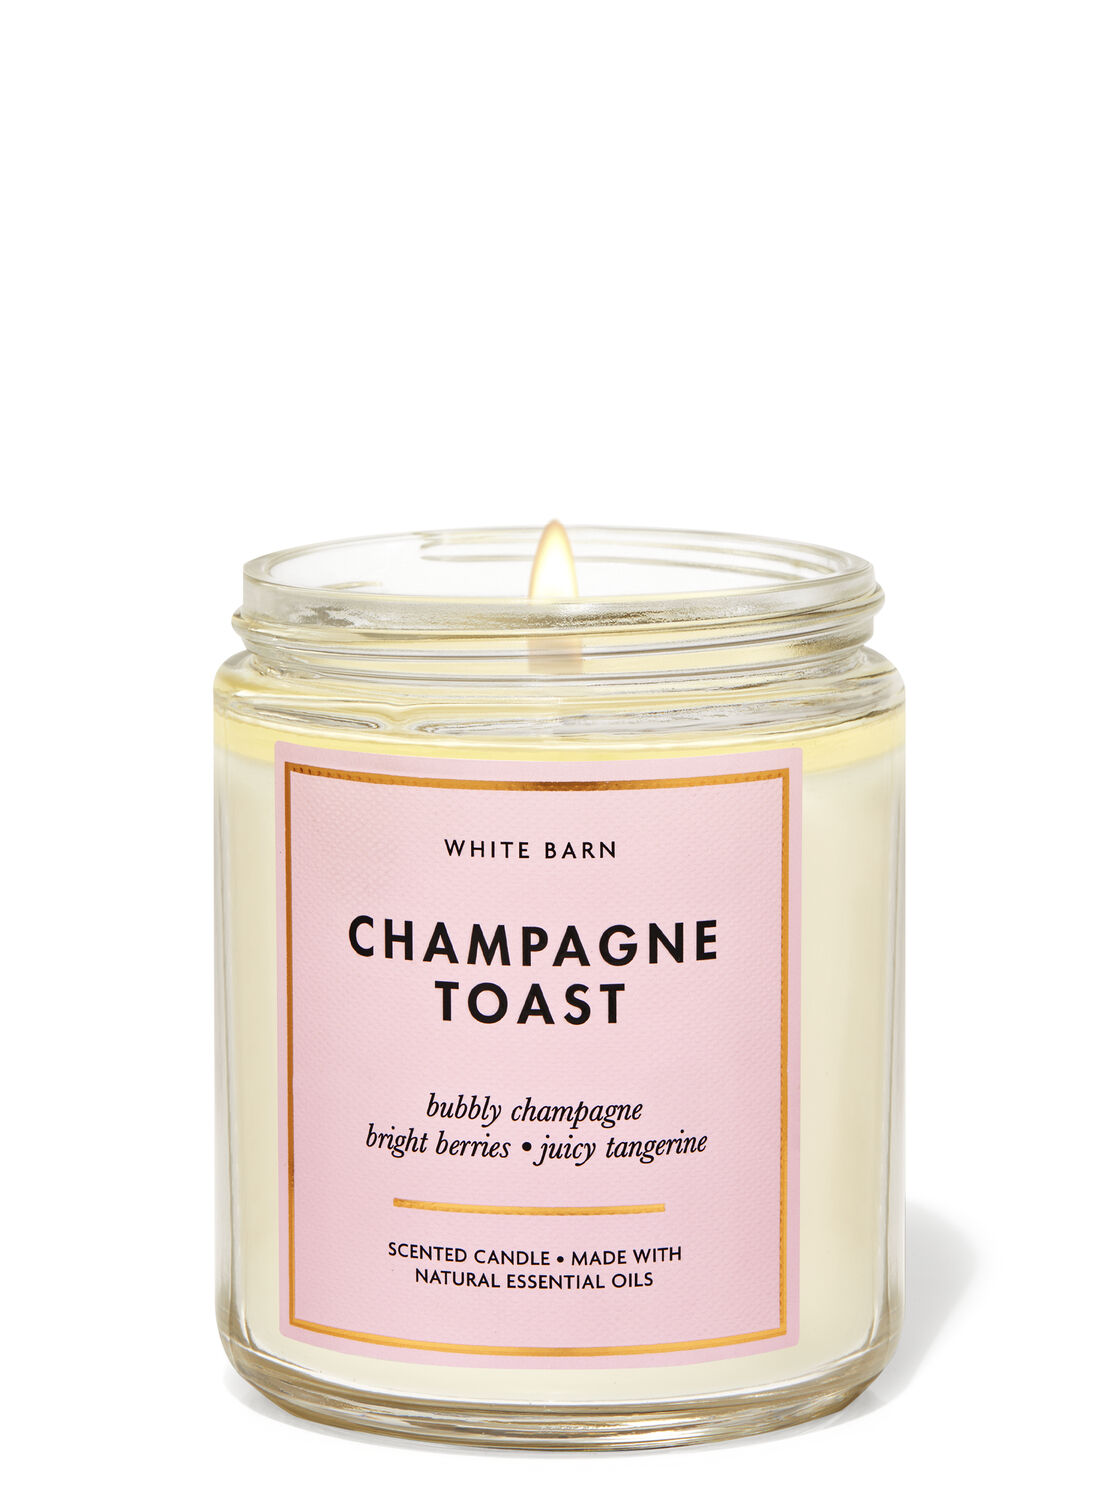 Thank You Bath & Body Works CHAMPAGNE TOAST 3 wick Scented Candle Lot of 2 